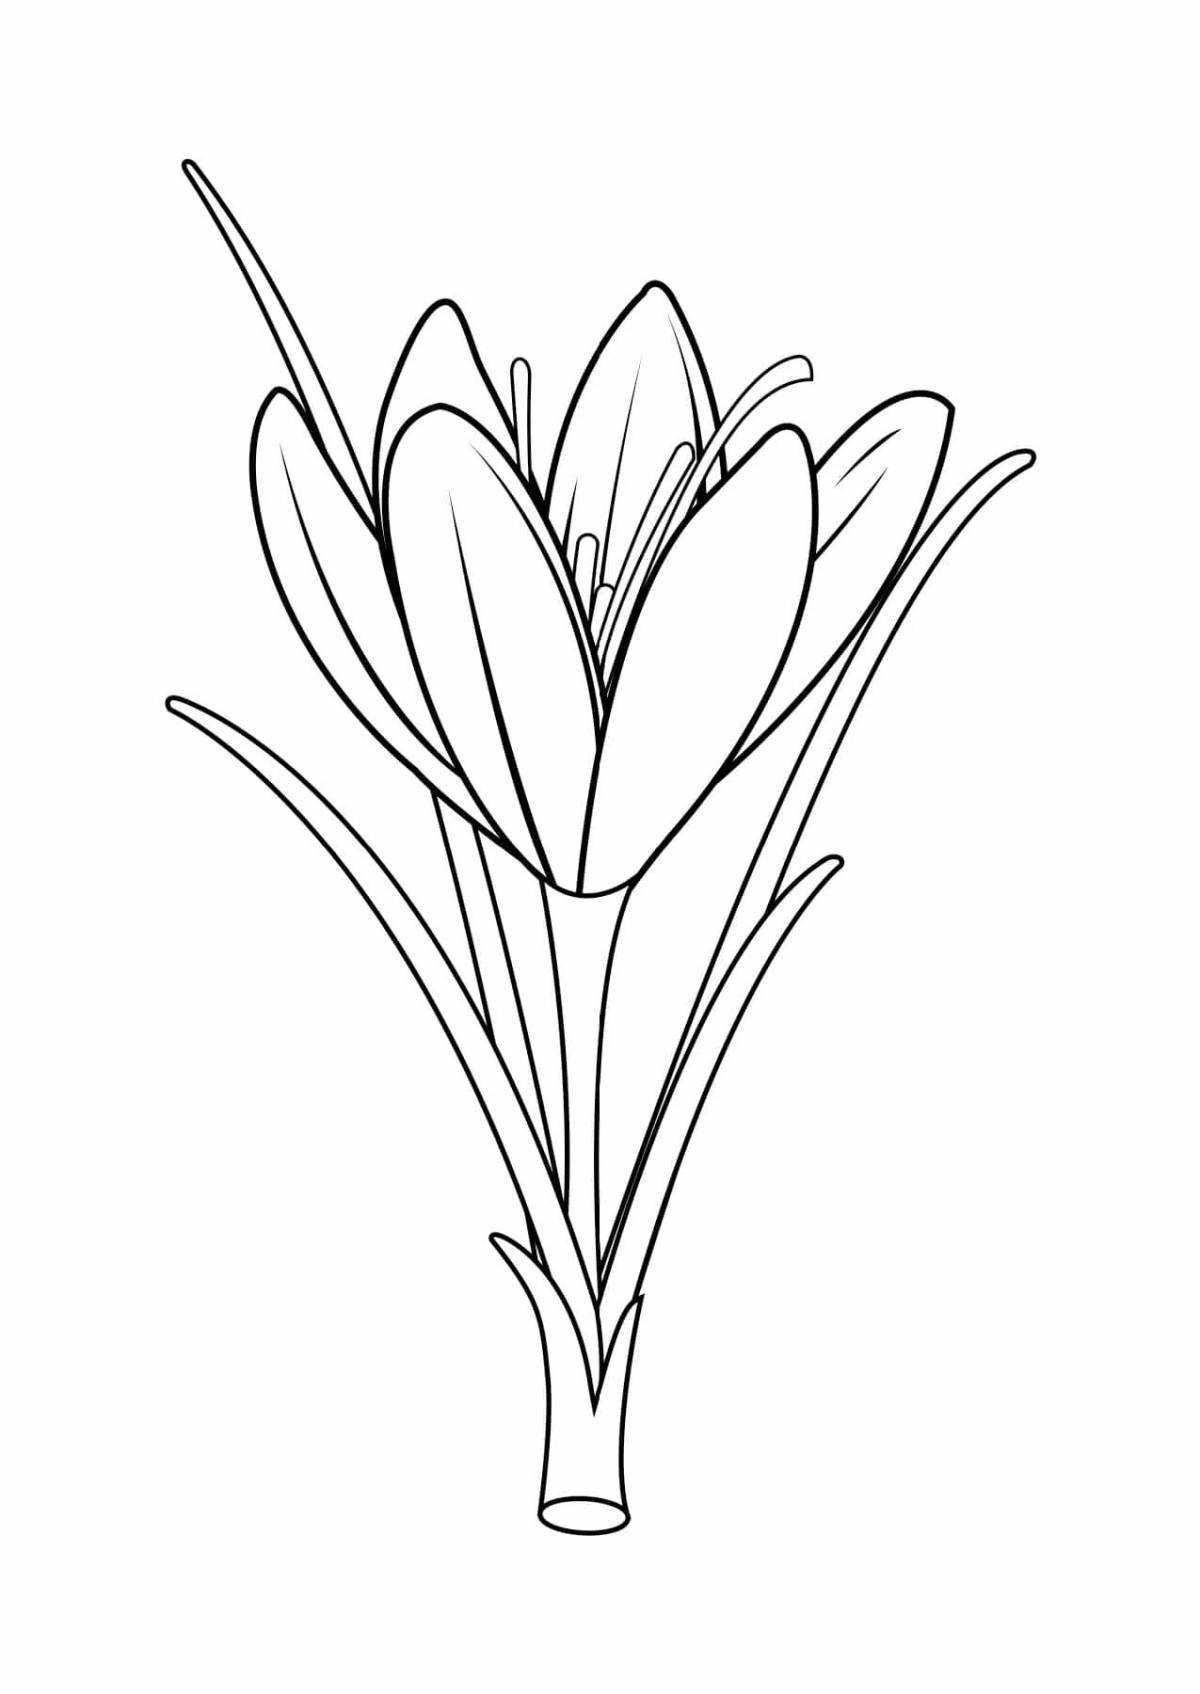 Glowing grass coloring page